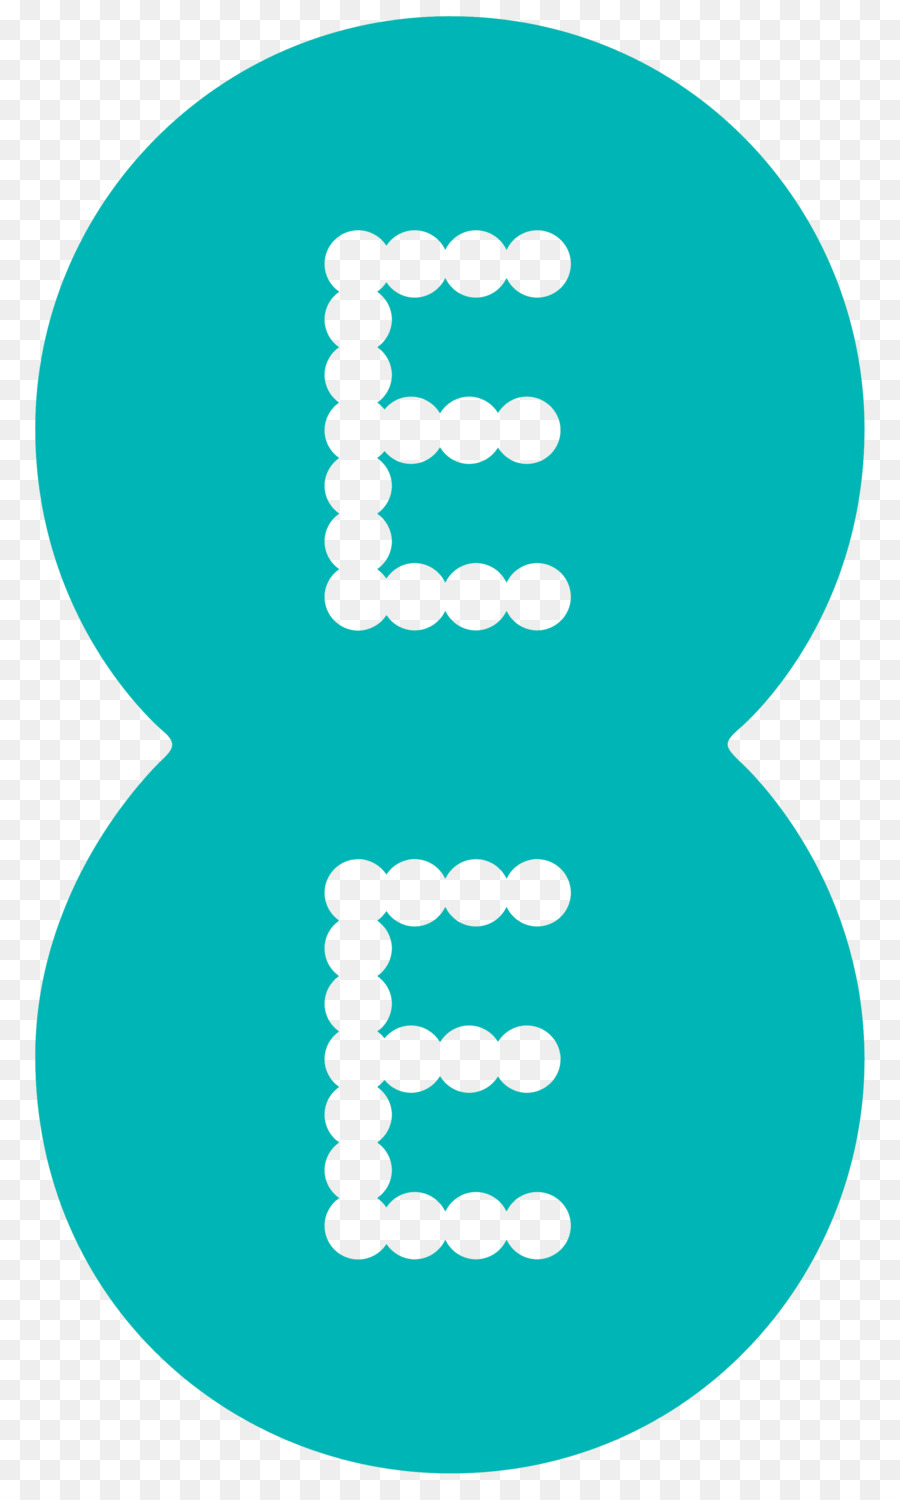 EE Limited LTE 4G-Logo Clip art - Iphone